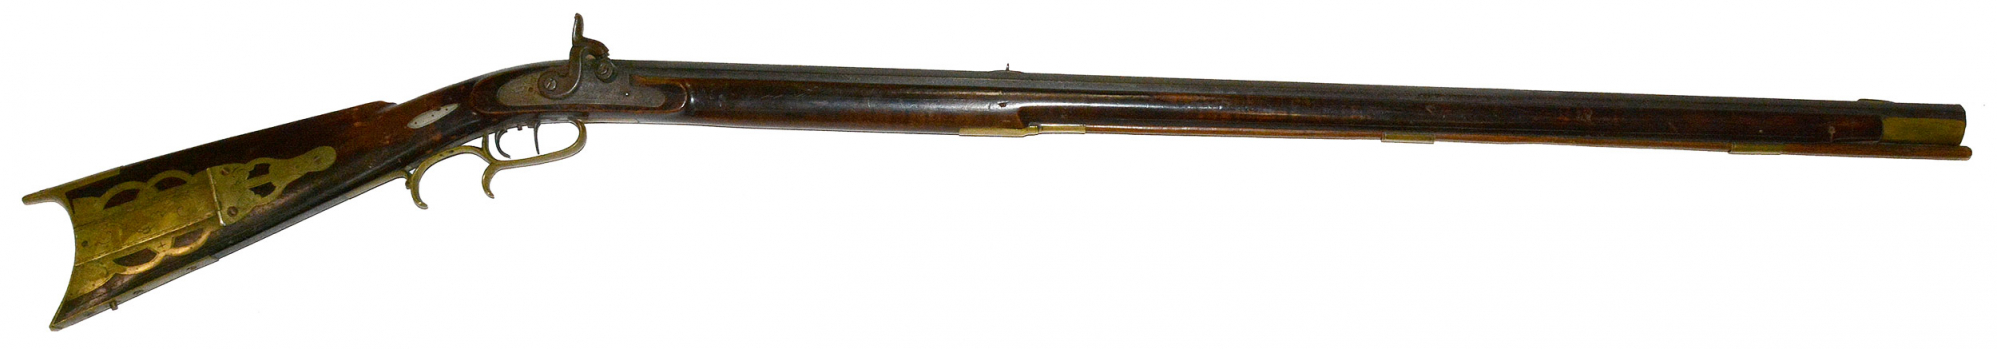 PERCUSSION FULL STOCK PENNSYLVANIA/KENTUCKY RIFLE WITH PIERCED PATCH BOX AND JOSEPH GOLCHER CAP LOCK